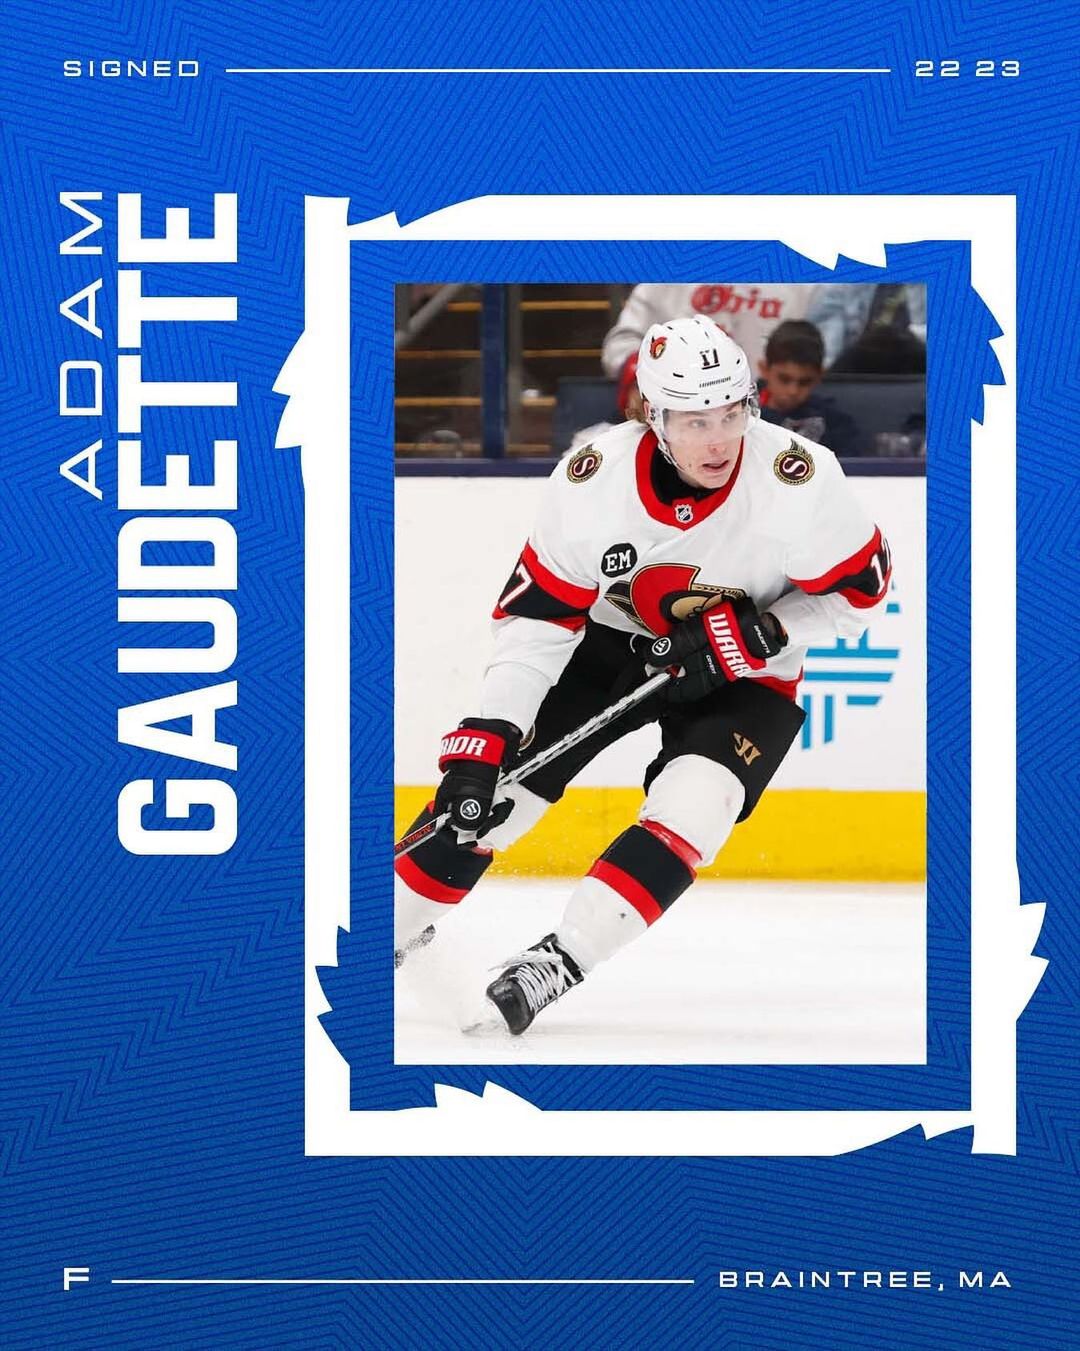 We've signed forward Adam Gaudette to a one-year contract. #LeafsForever...